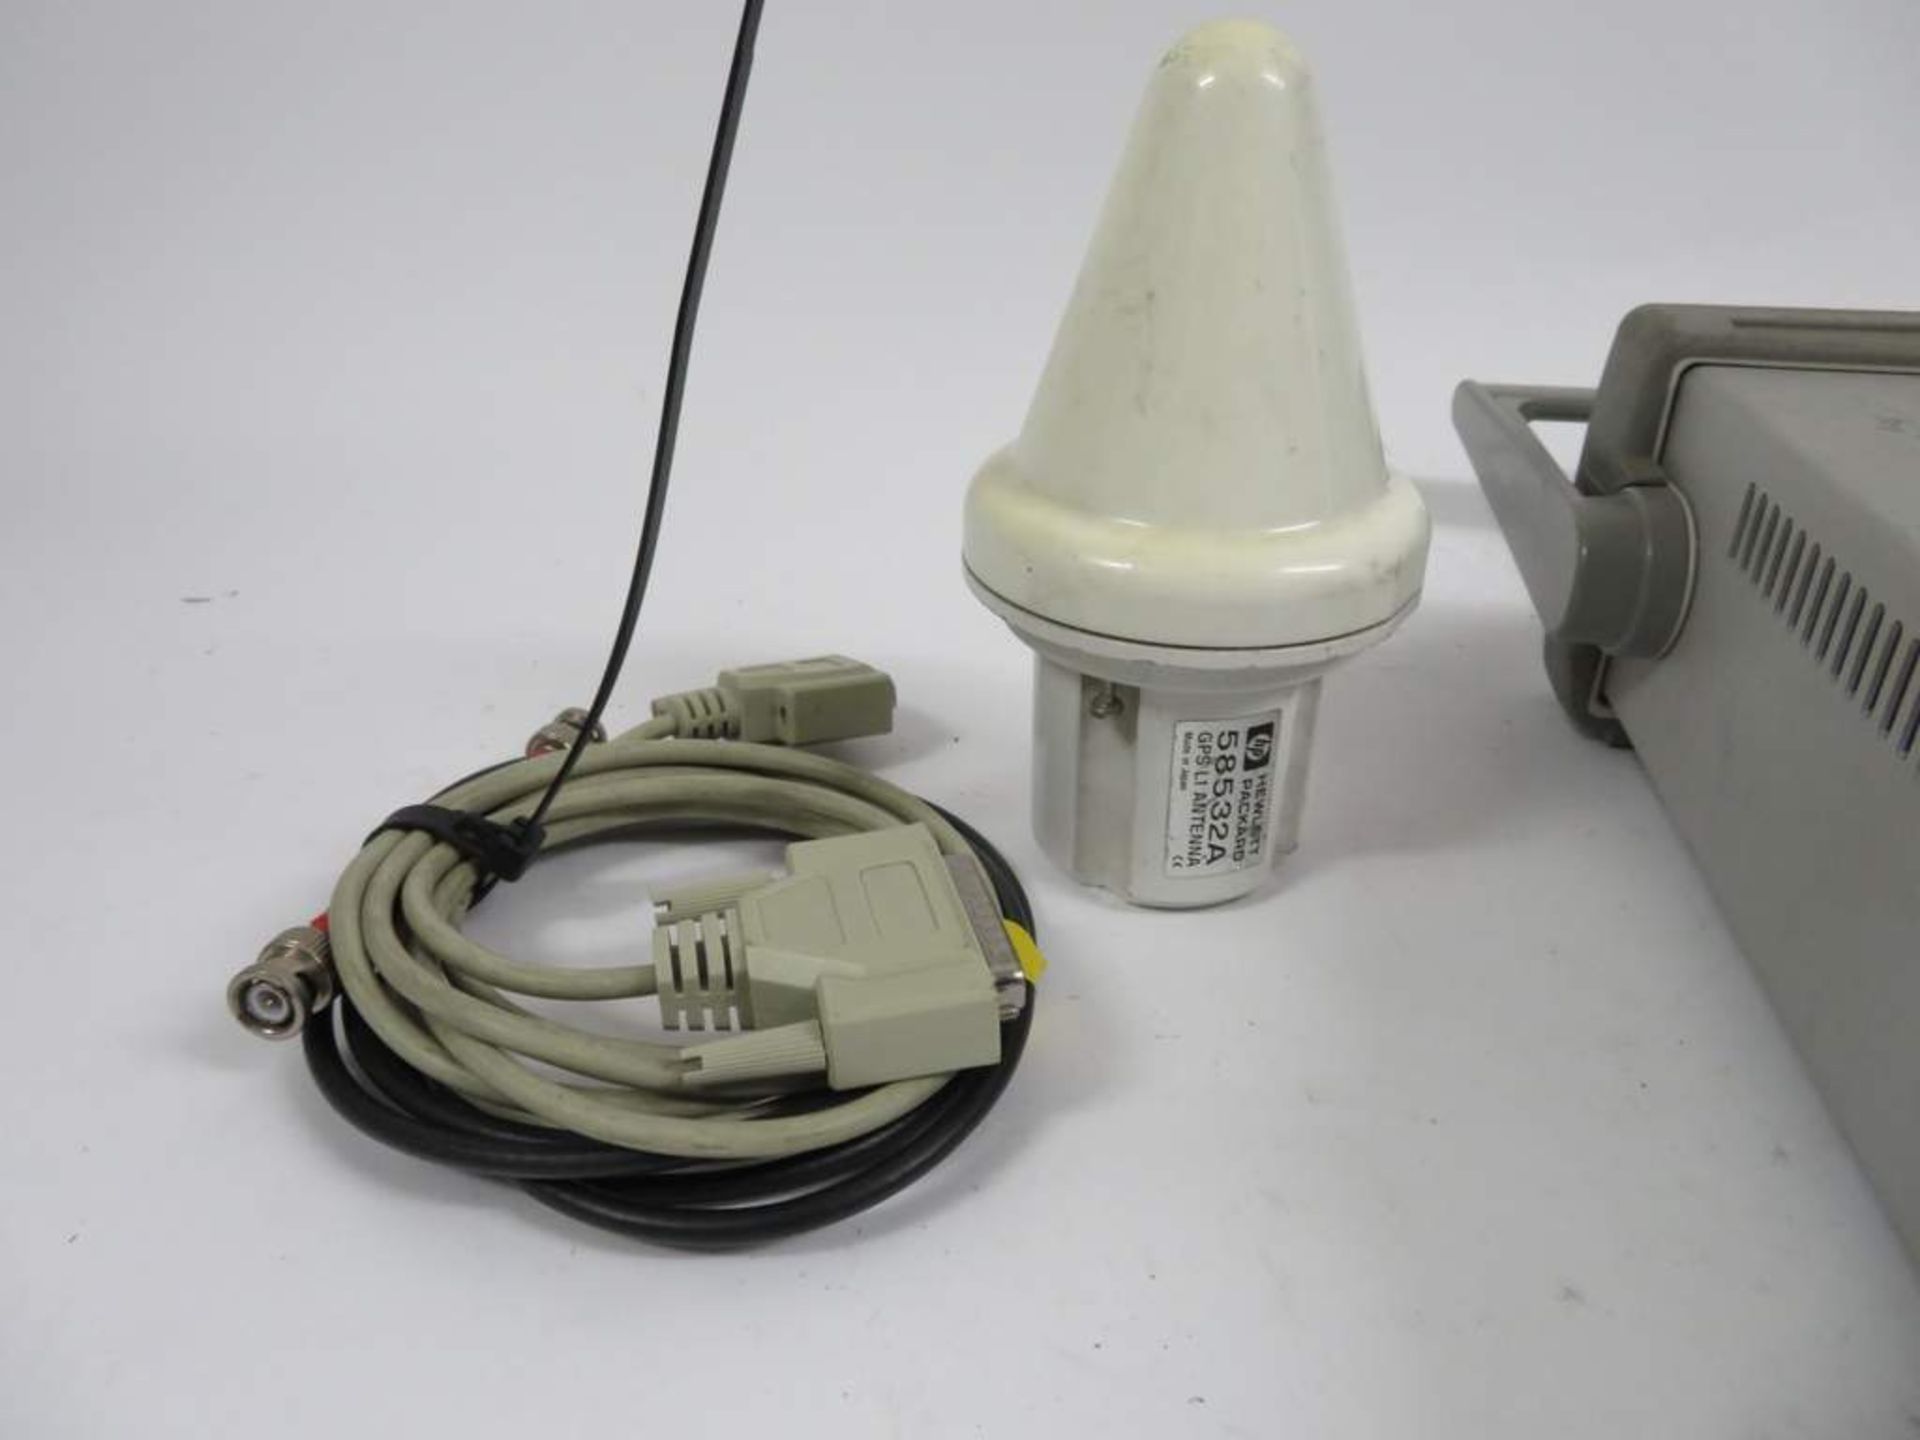 Hewlett Packard 58532A GPS L1 Antenna & HP 58503B GPS time and frequency reference receiver - Bild 4 aus 5